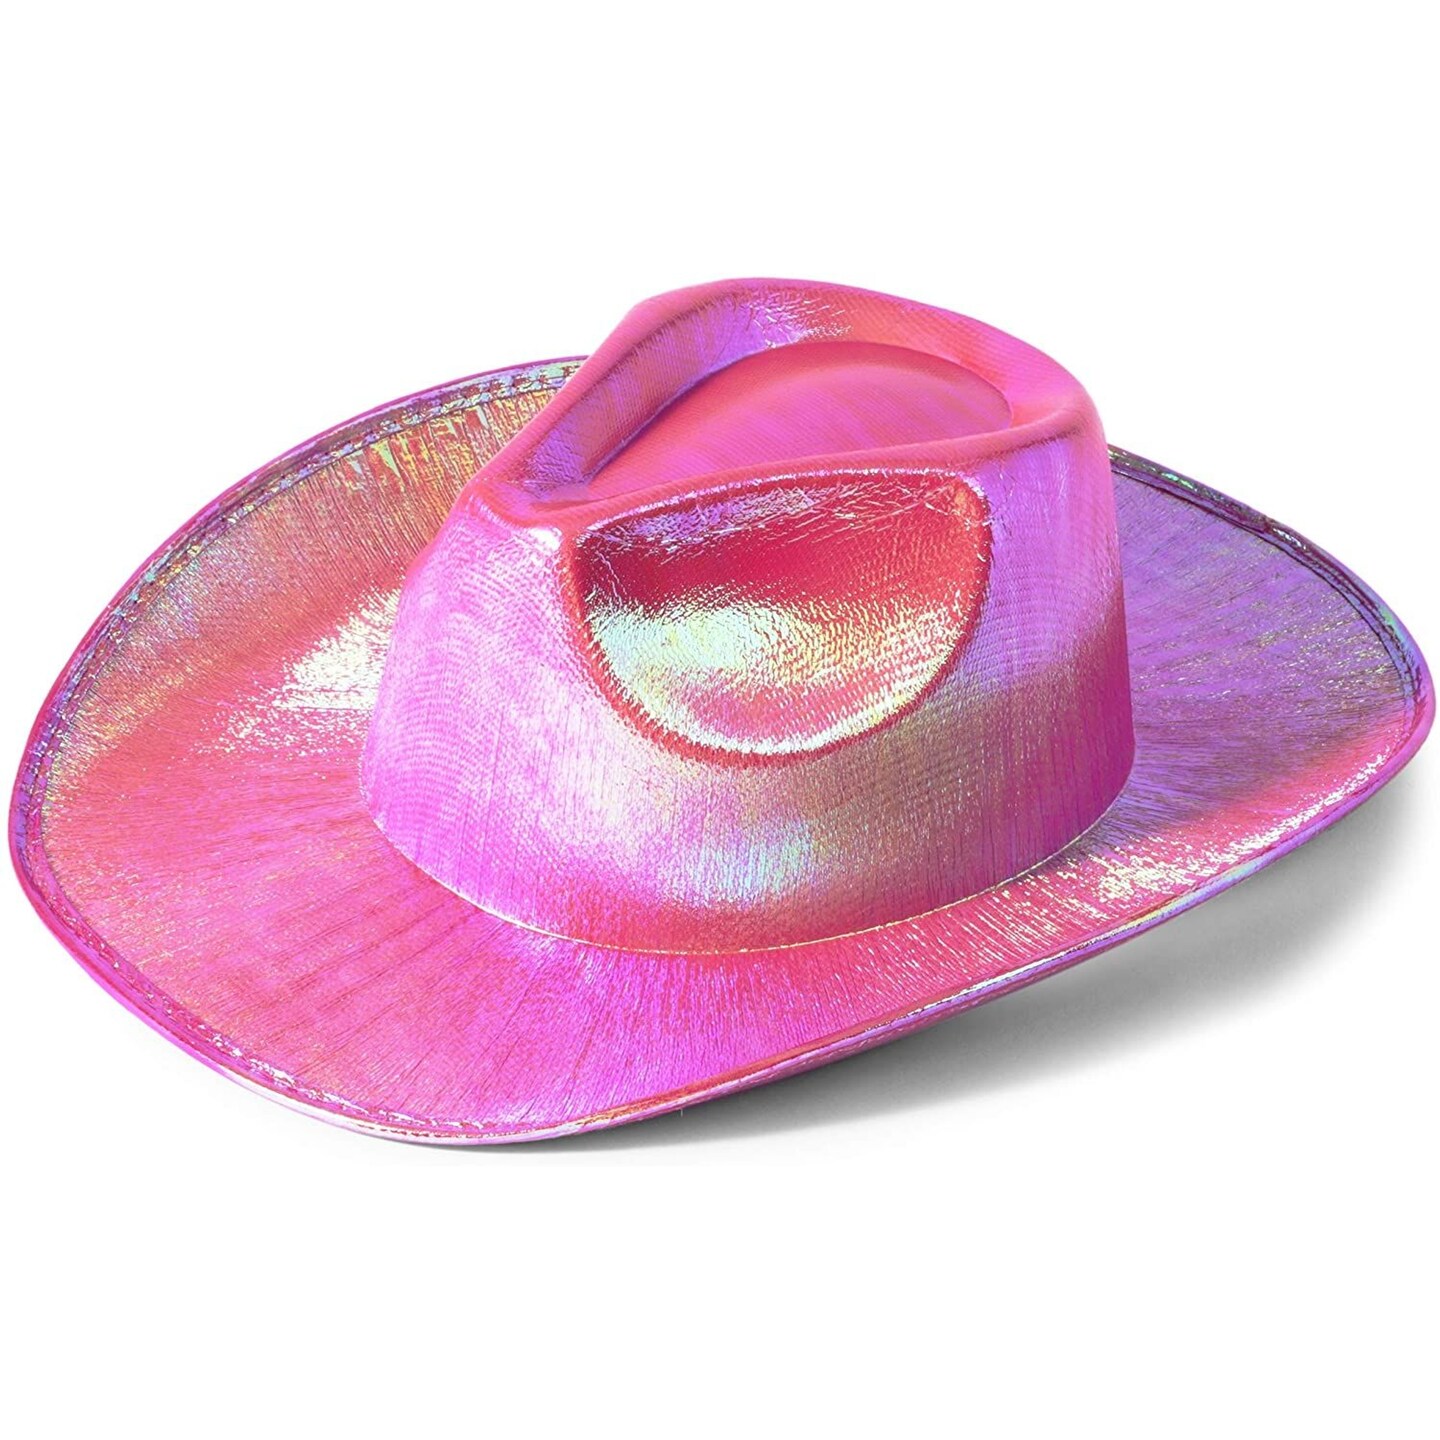 Pink Cowboy Hat - Sparkly Metallic Cowgirl Hat for Costume, Dress Up Birthday, Bachelorette Party Accessories (Adult Size, Hot Pink)